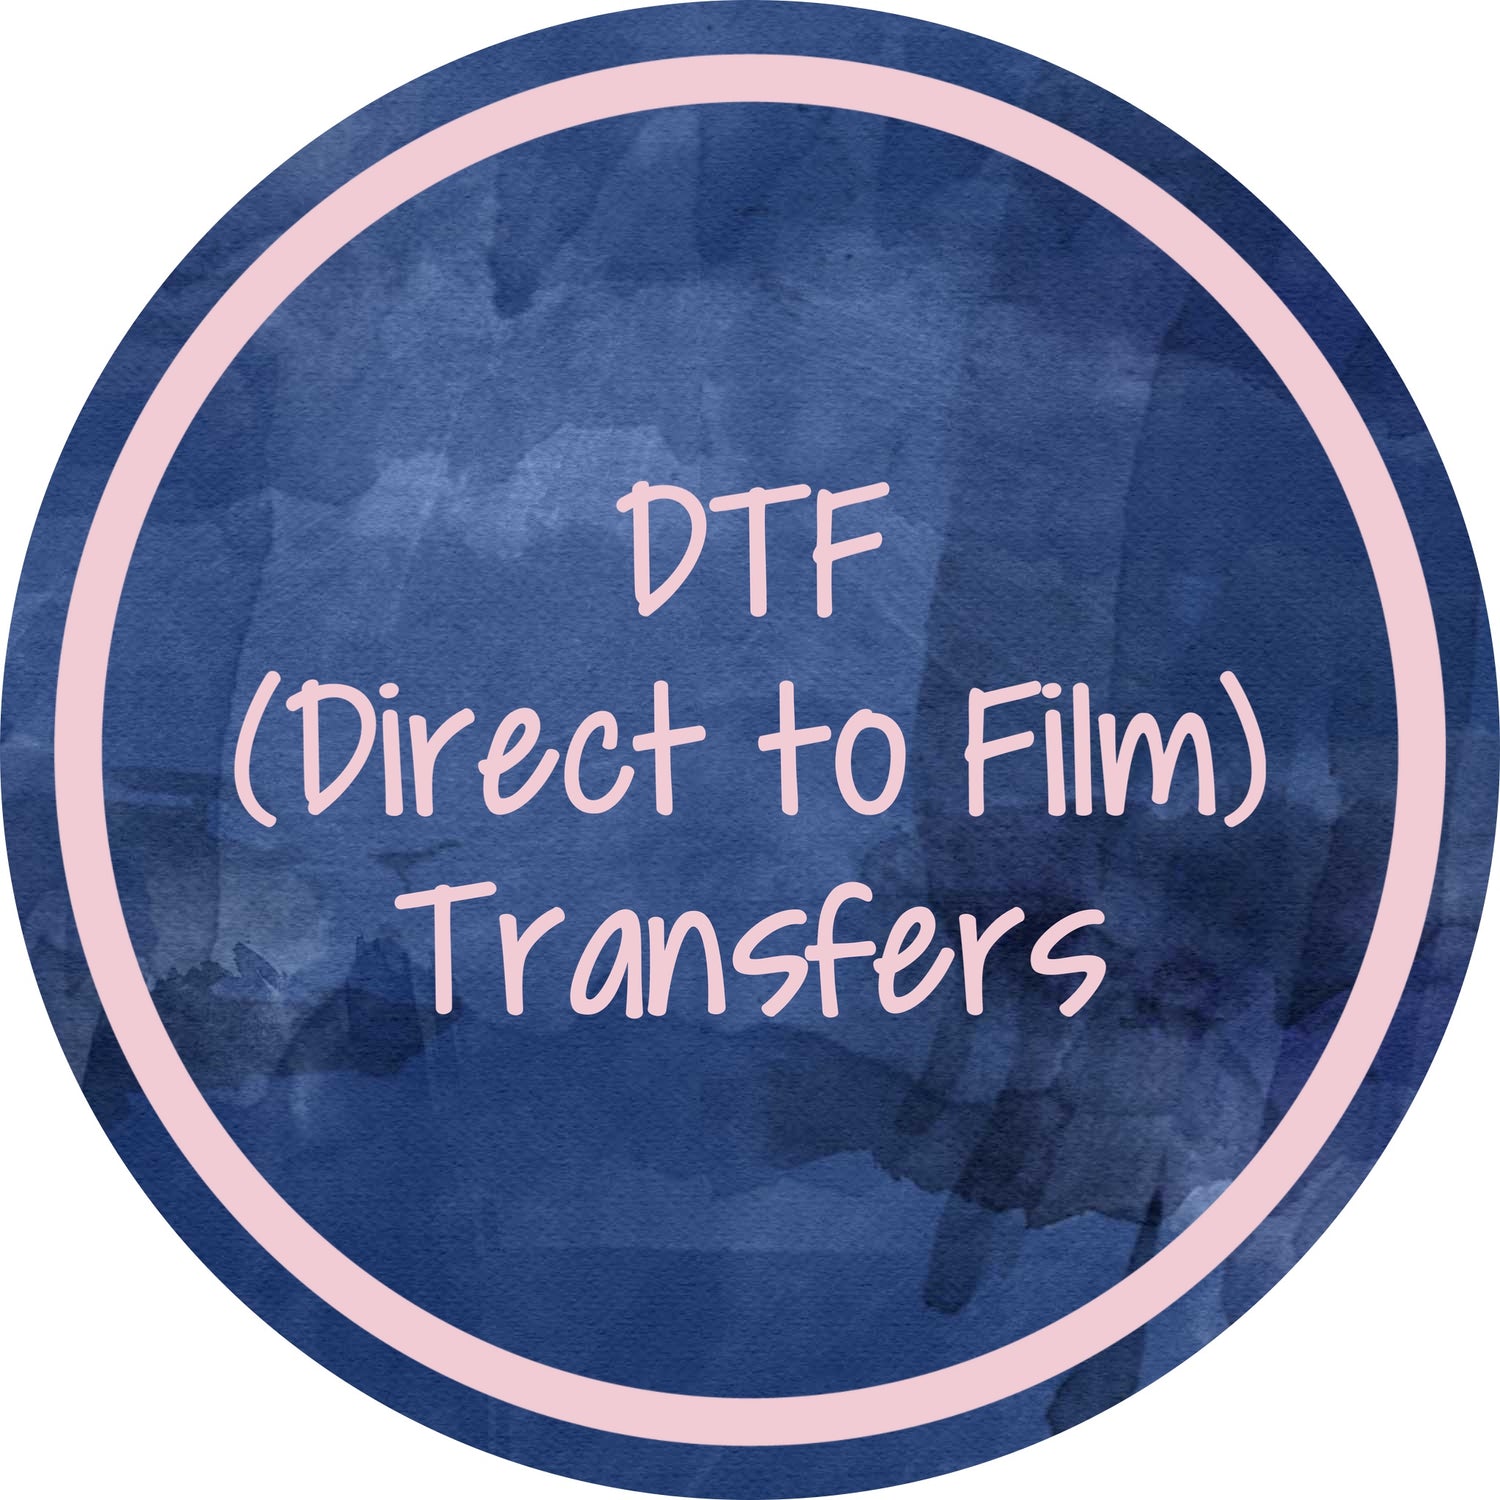 DTF (Direct to Film) Transfers